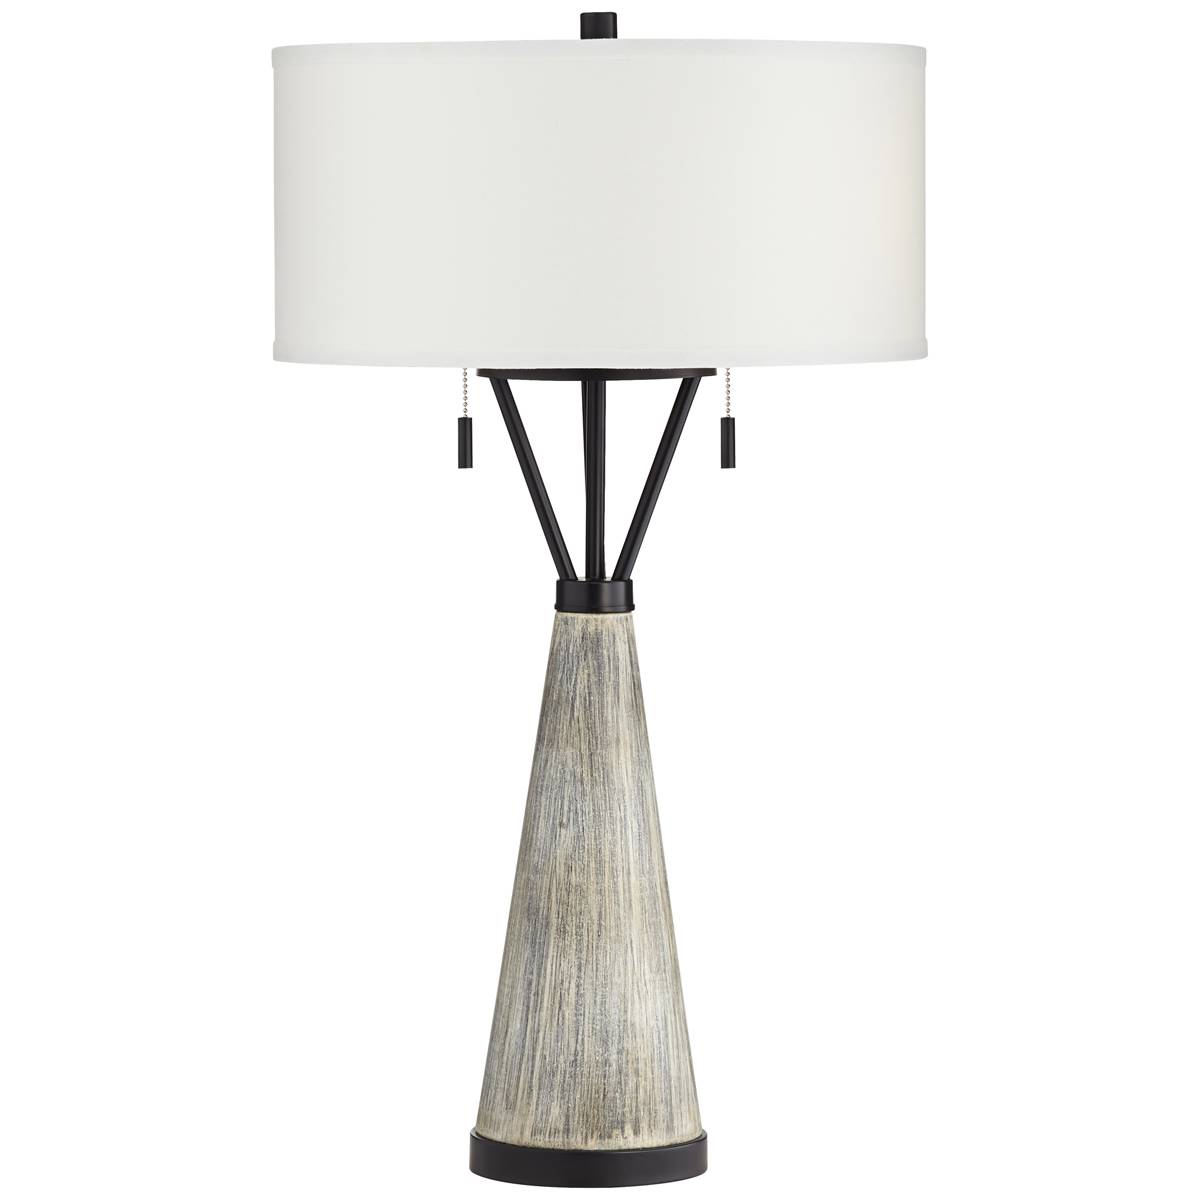 Pacific Coast Lighting Oakland 29in. Grey Table Lamp